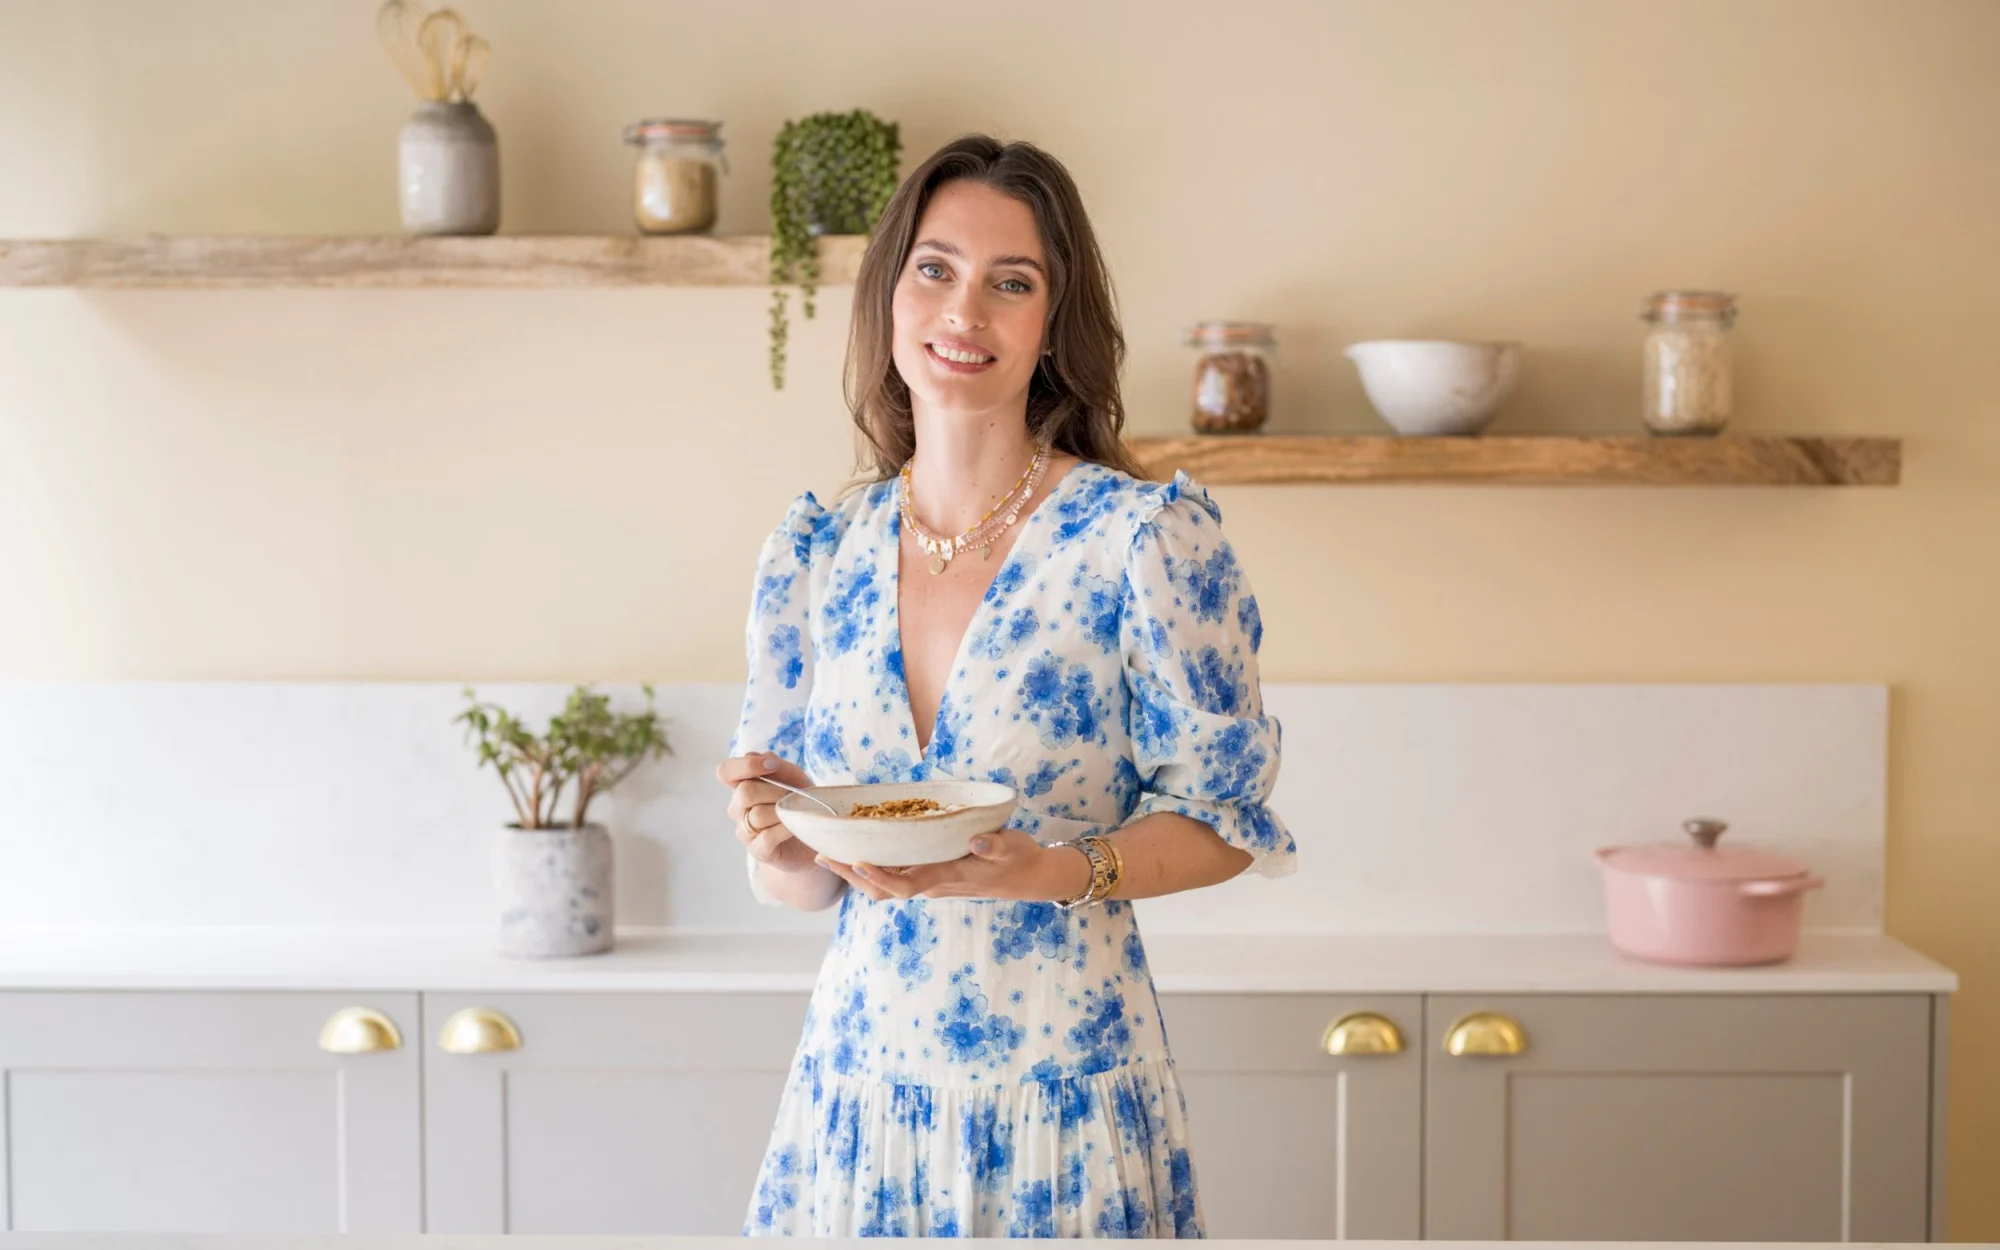 Deliciously Ella with her cereal in a bowl